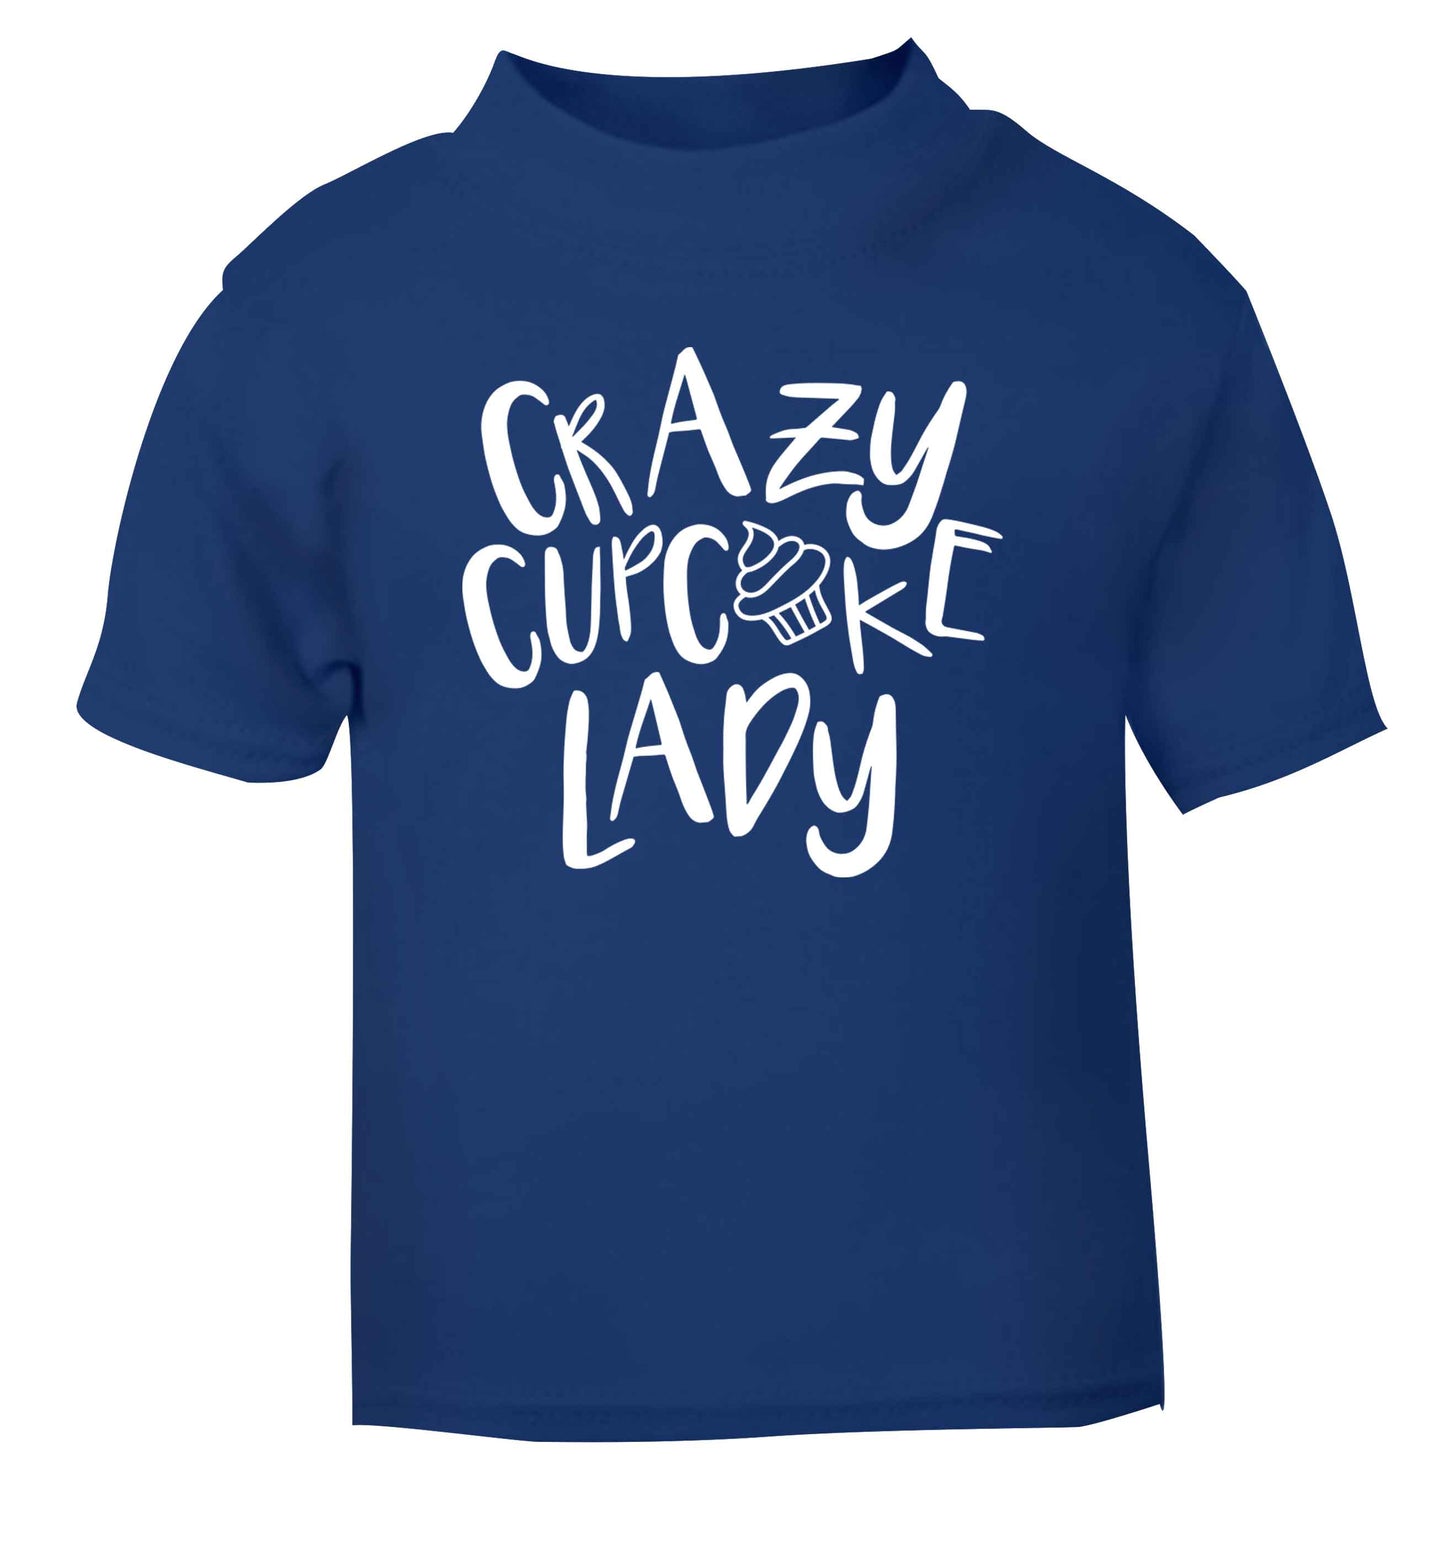 Crazy cupcake lady blue Baby Toddler Tshirt 2 Years